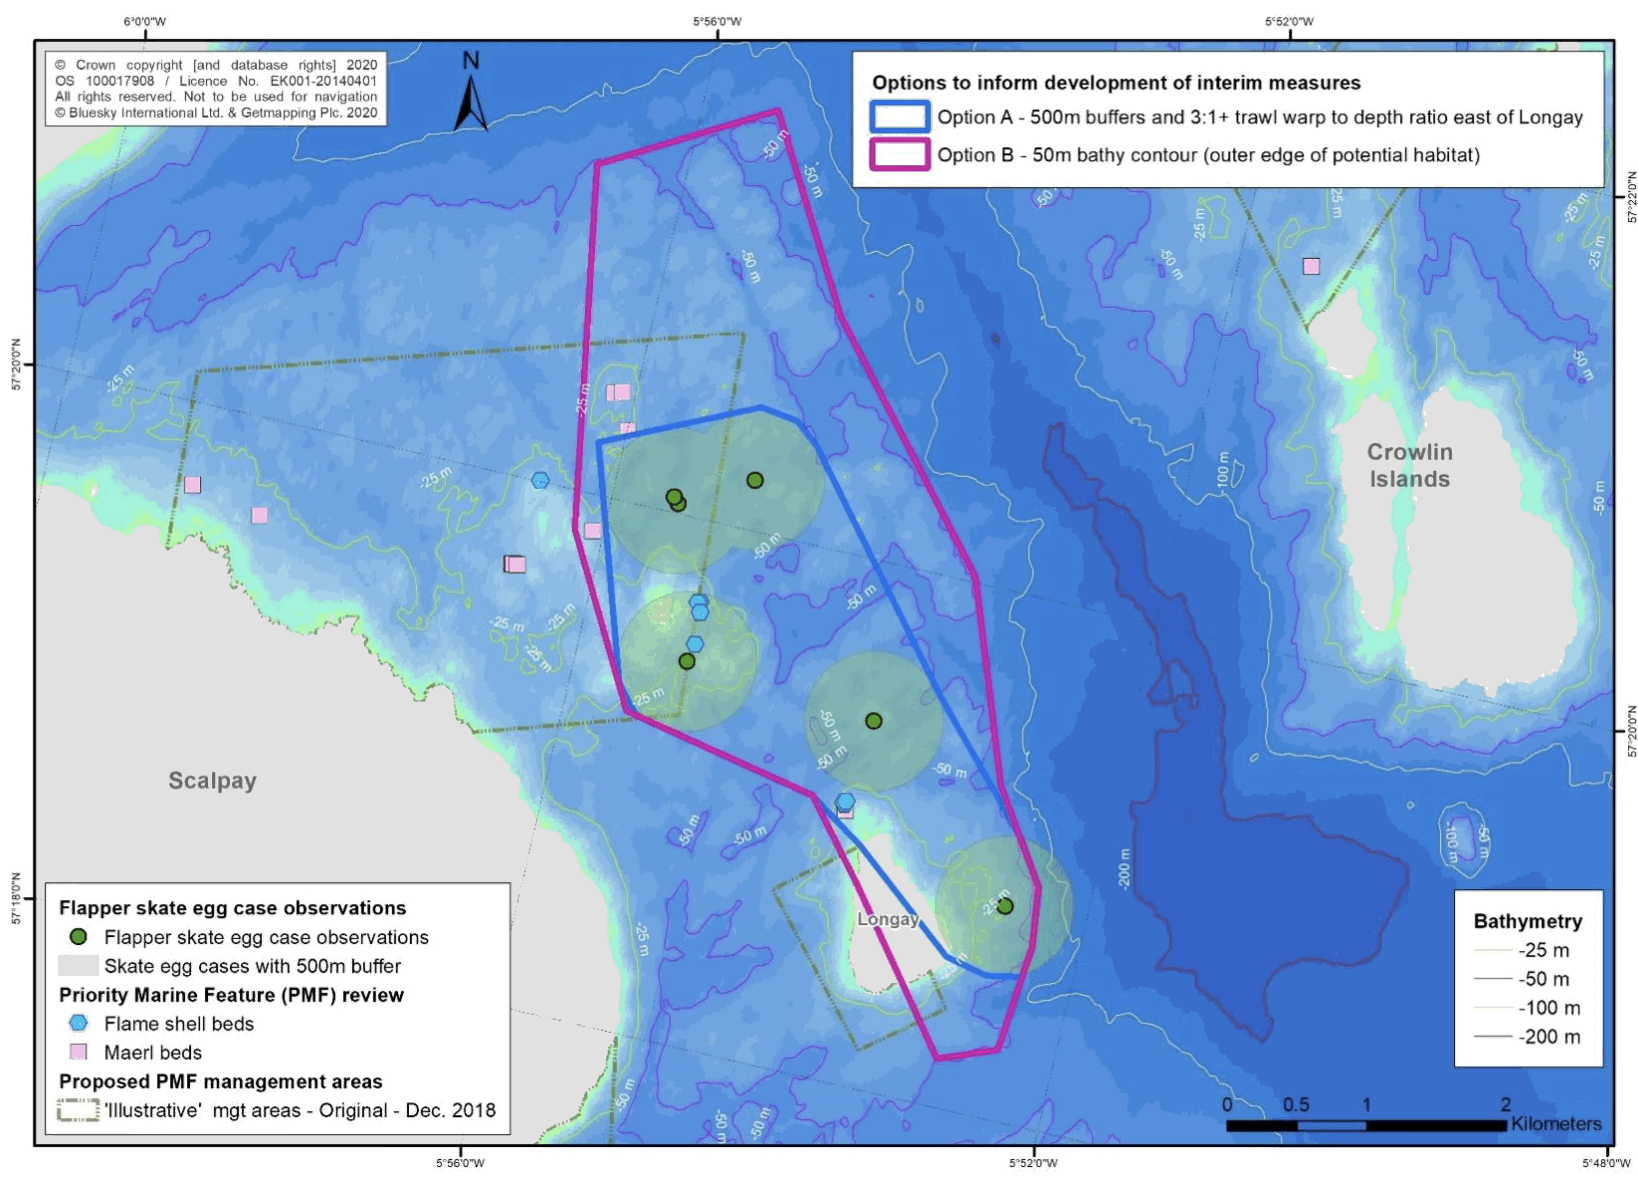 A map shows proposed Priority Marine Feature management areas near to the flapper skate egg records.